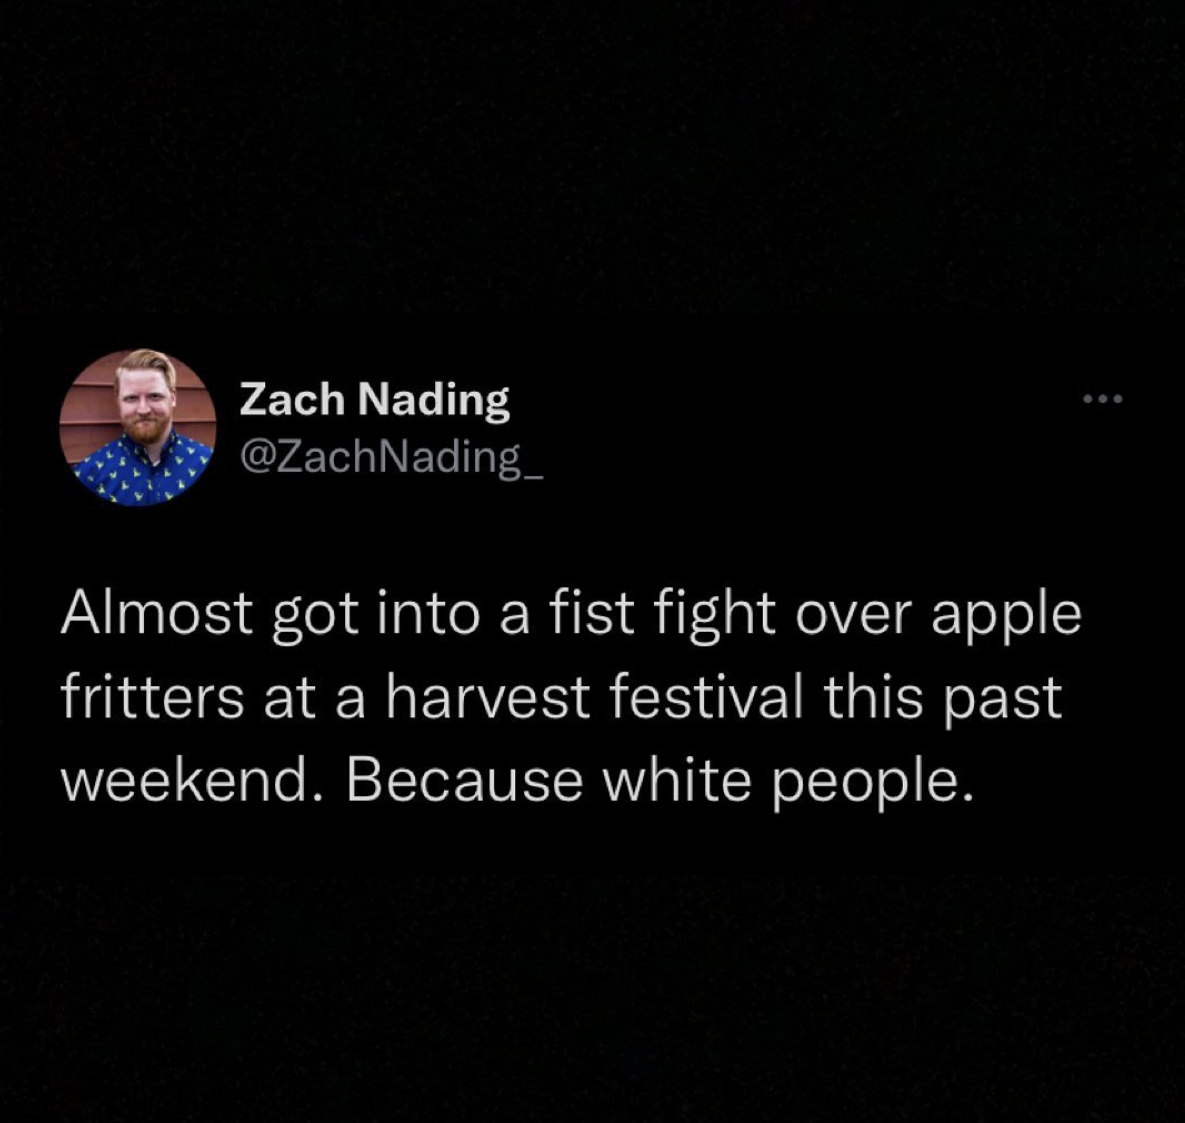 Zach Nading Nading Almost got into a fist fight over apple fritters at a harvest festival this past weekend. Because white people.